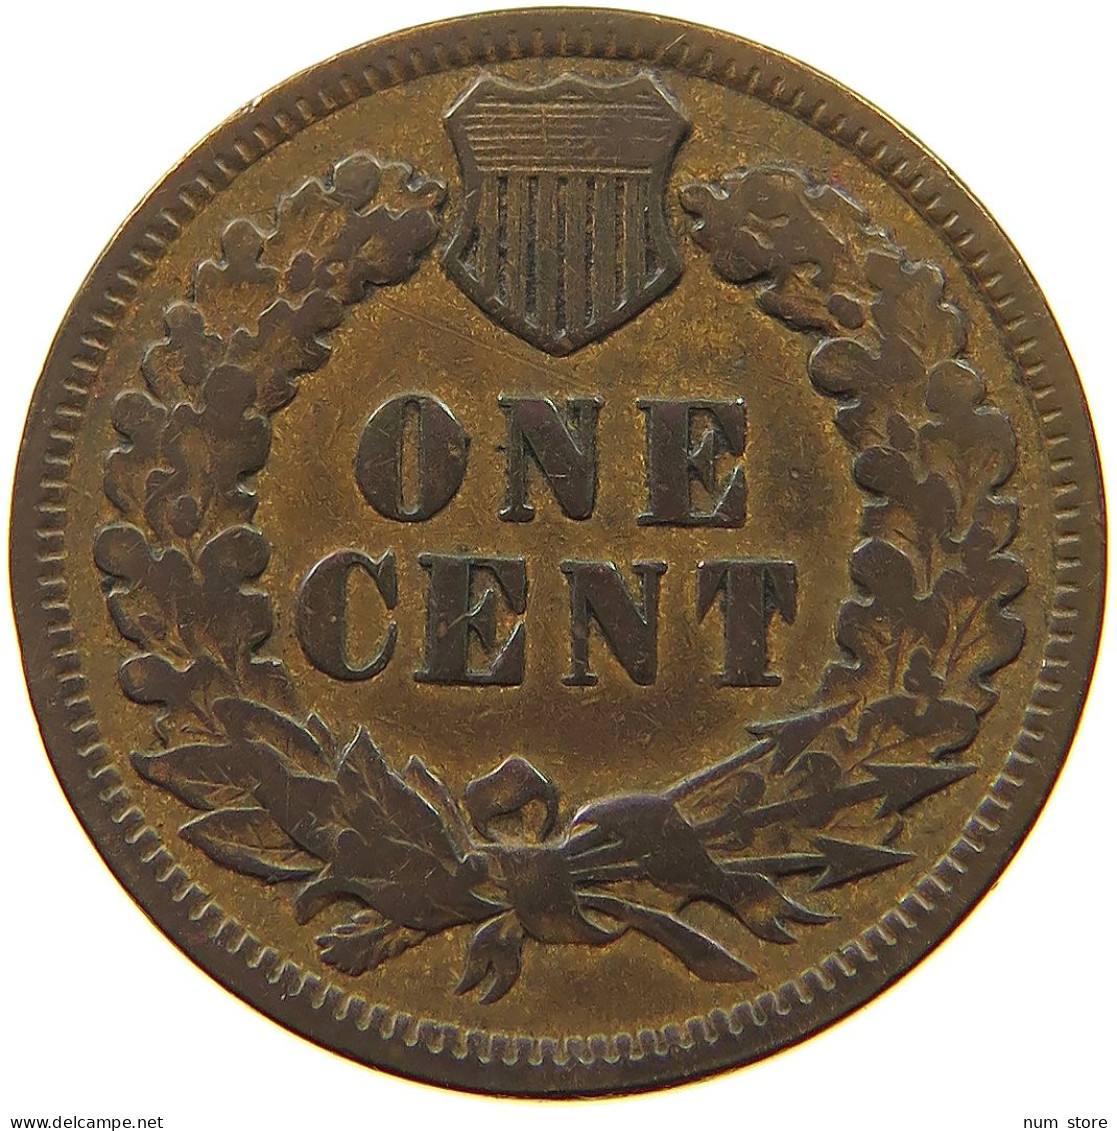 UNITED STATES OF AMERICA CENT 1892 INDIAN HEAD #s036 0743 - 1859-1909: Indian Head